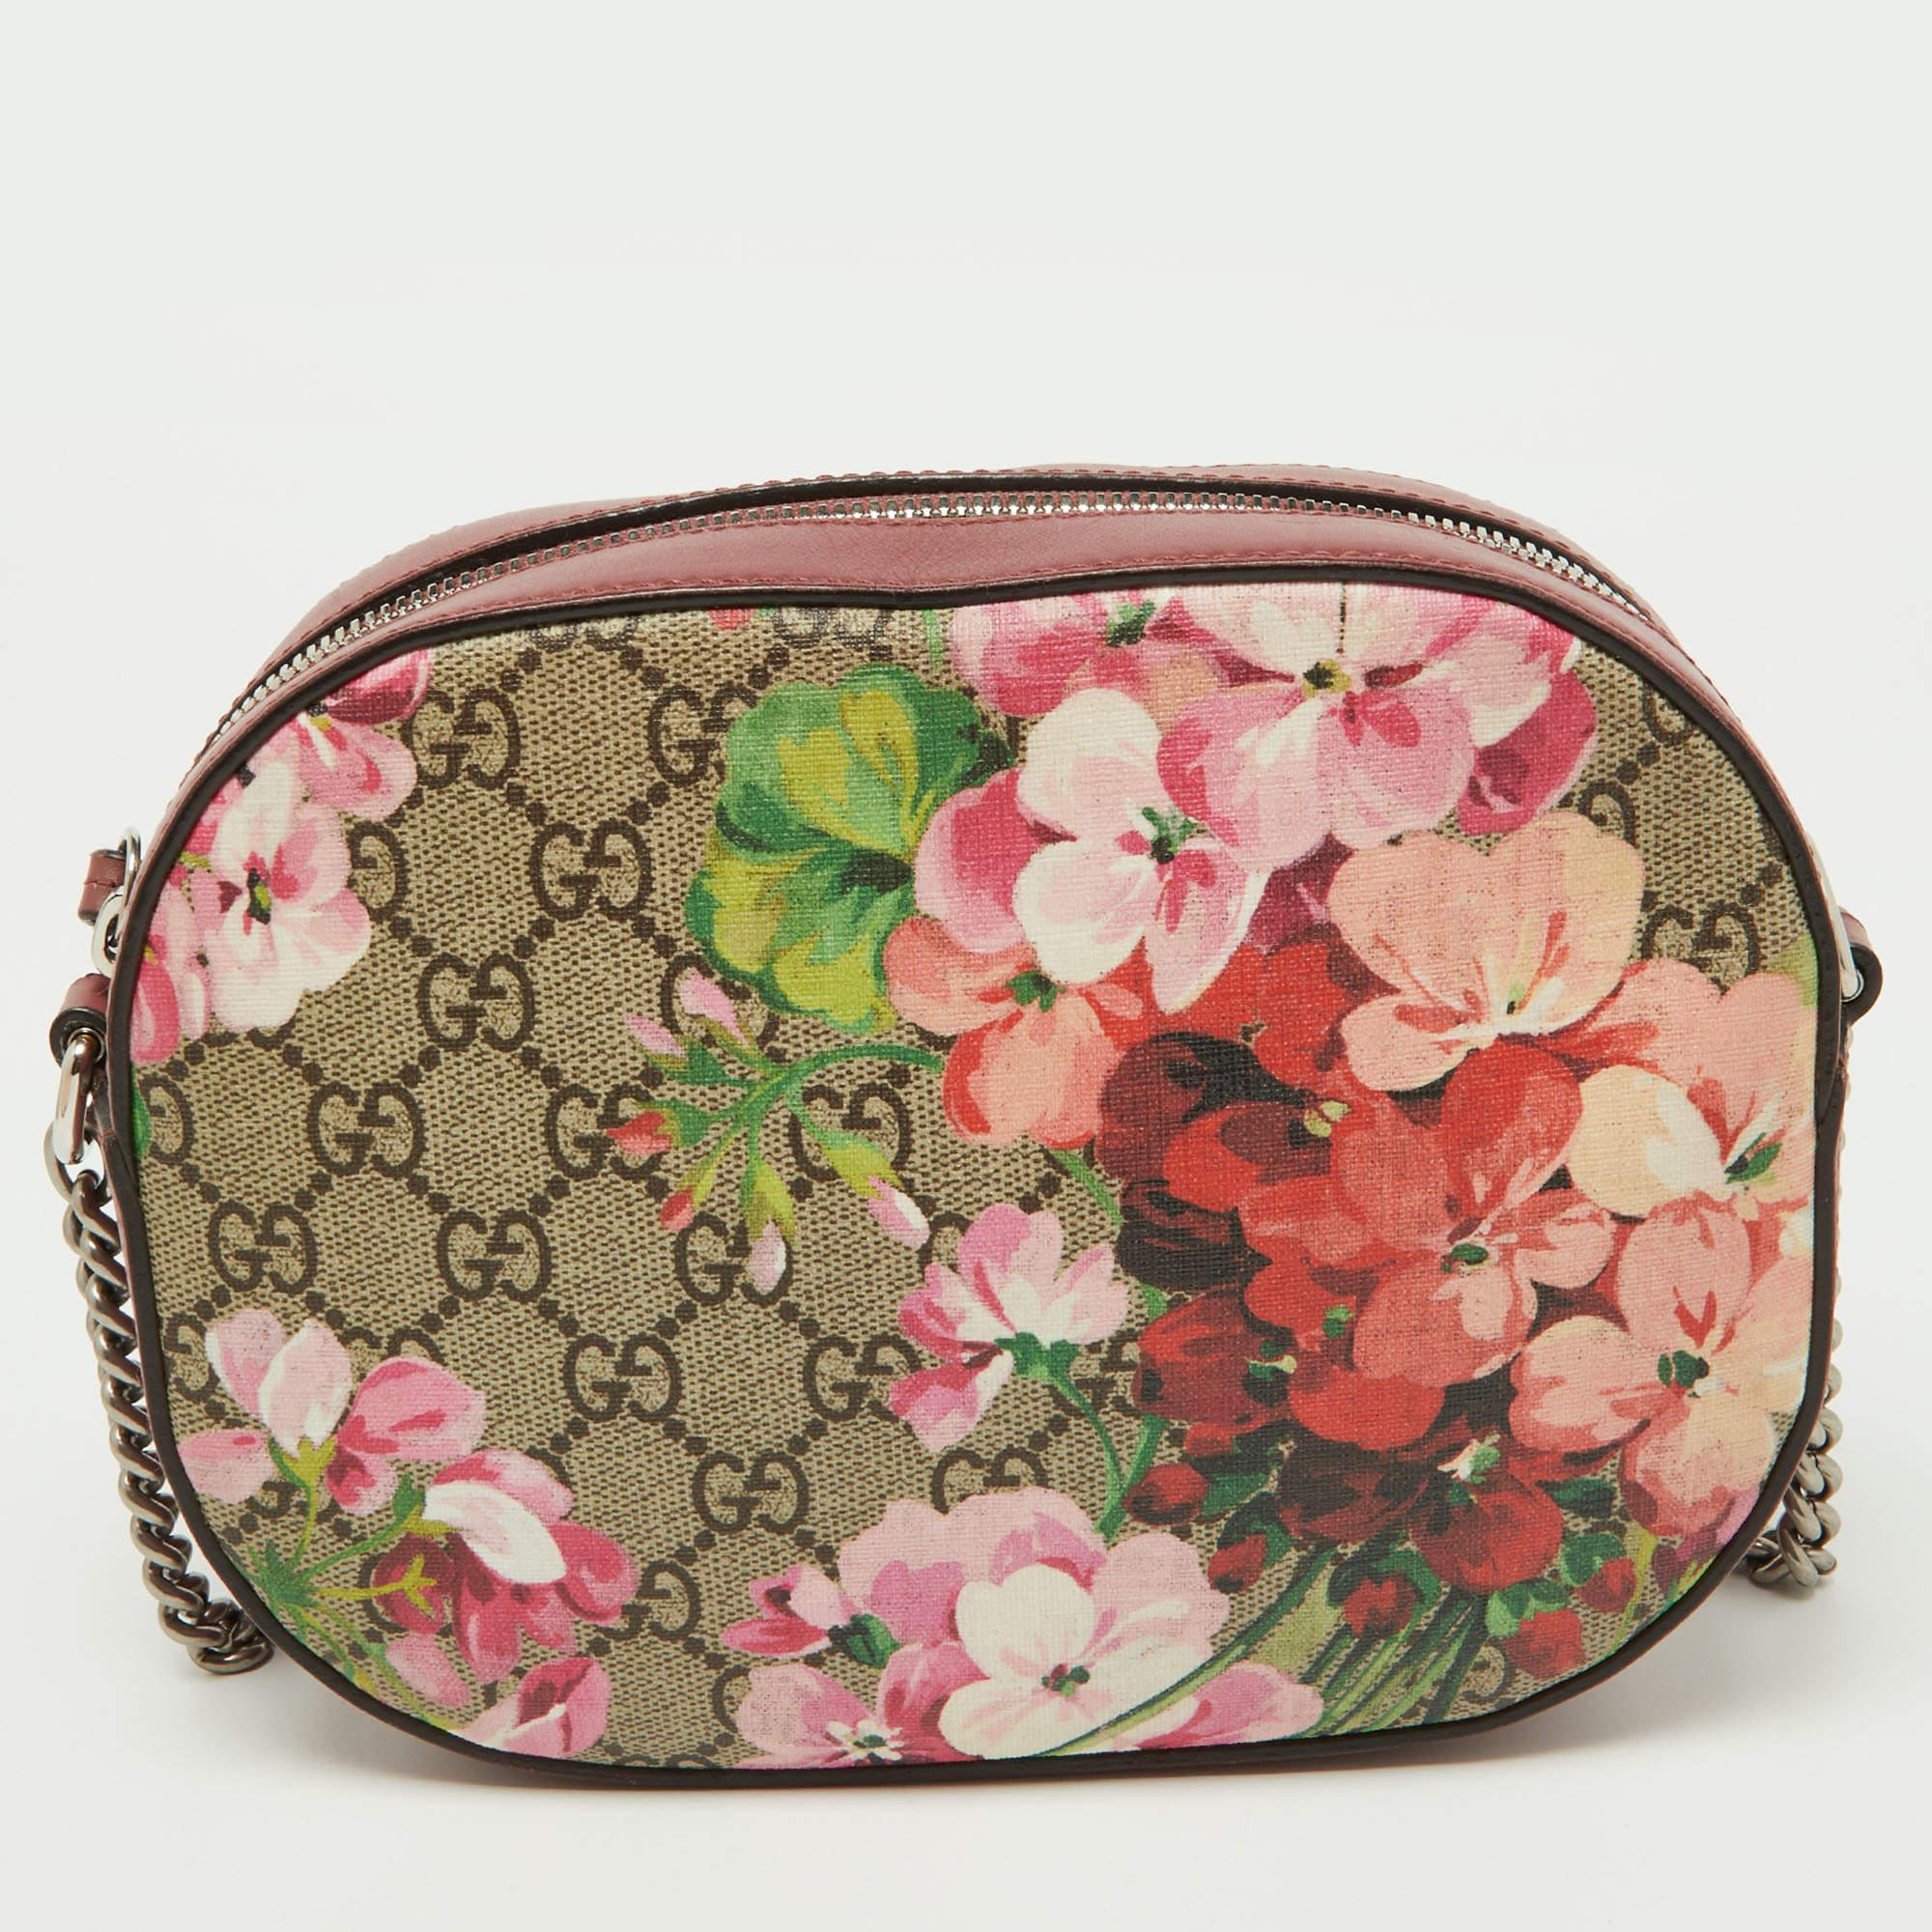 The simple silhouette and the use of Blooms Print GG Supreme canvas and leather for the exterior bring out the appeal of this Gucci everyday bag. It features a long chain, silver-tone hardware, and an Alcantara-lined interior.

Includes: Brand